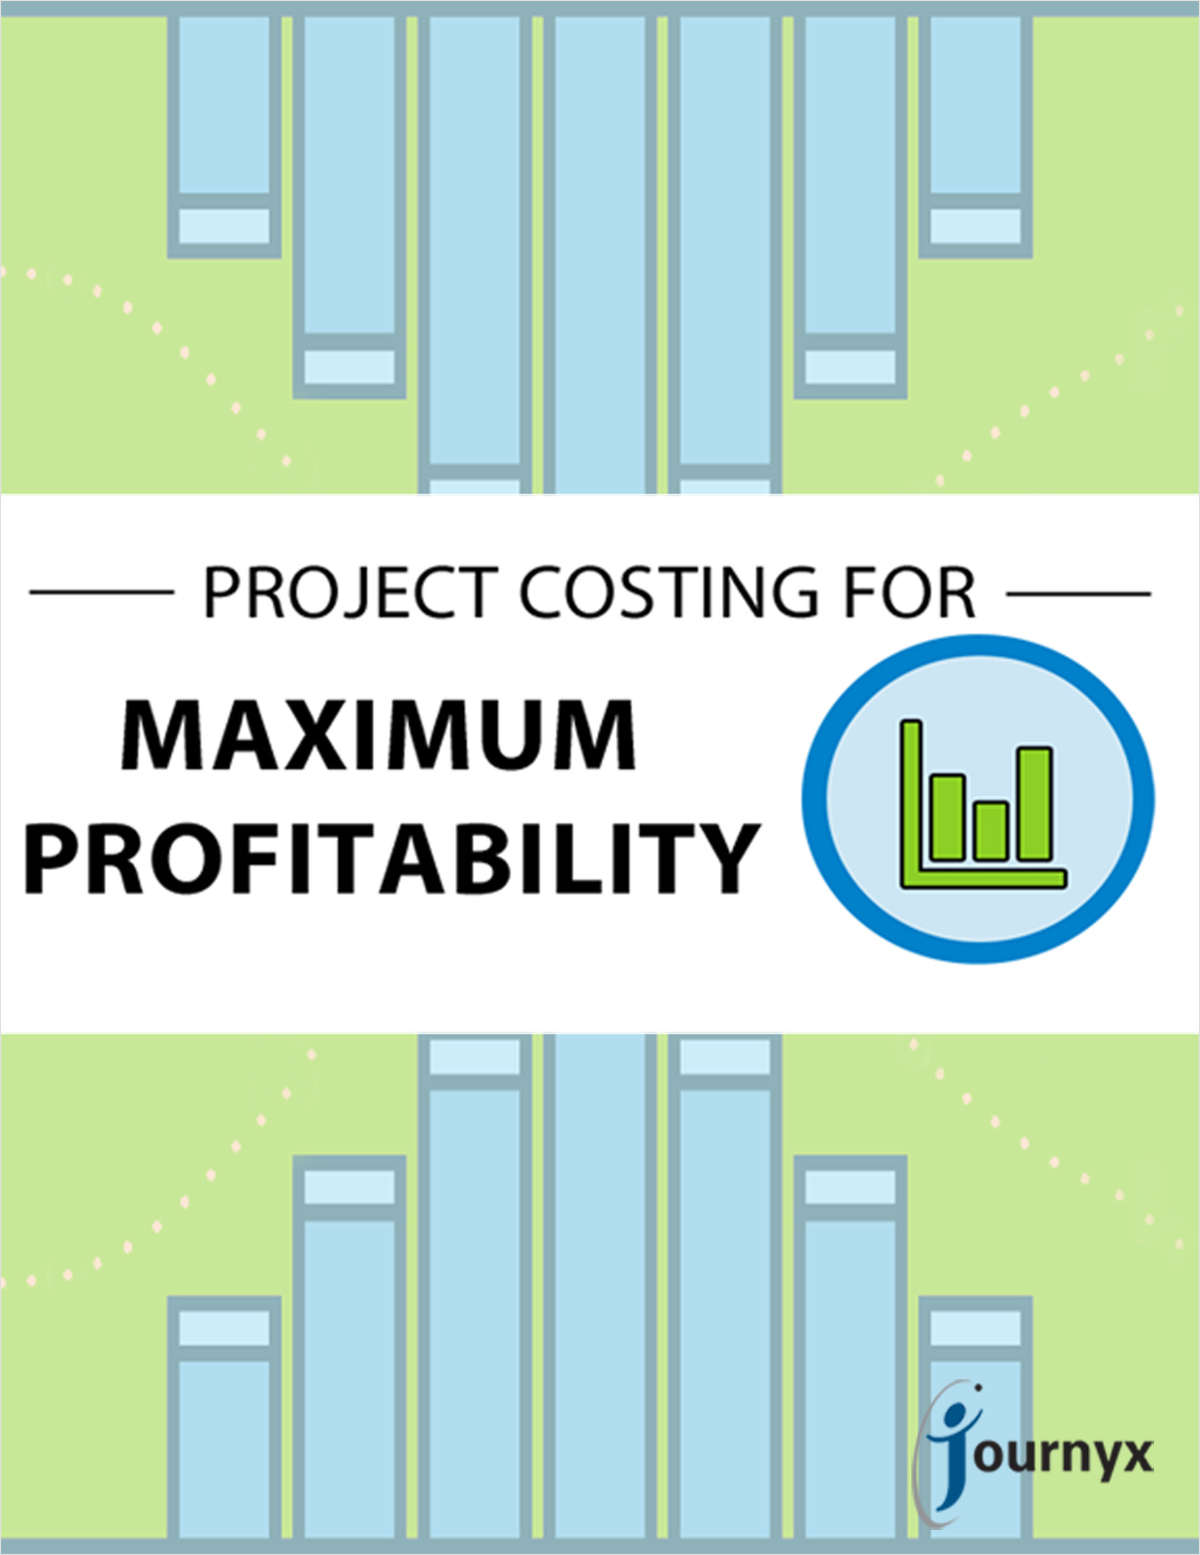 Project Costing for Maximum Profitability